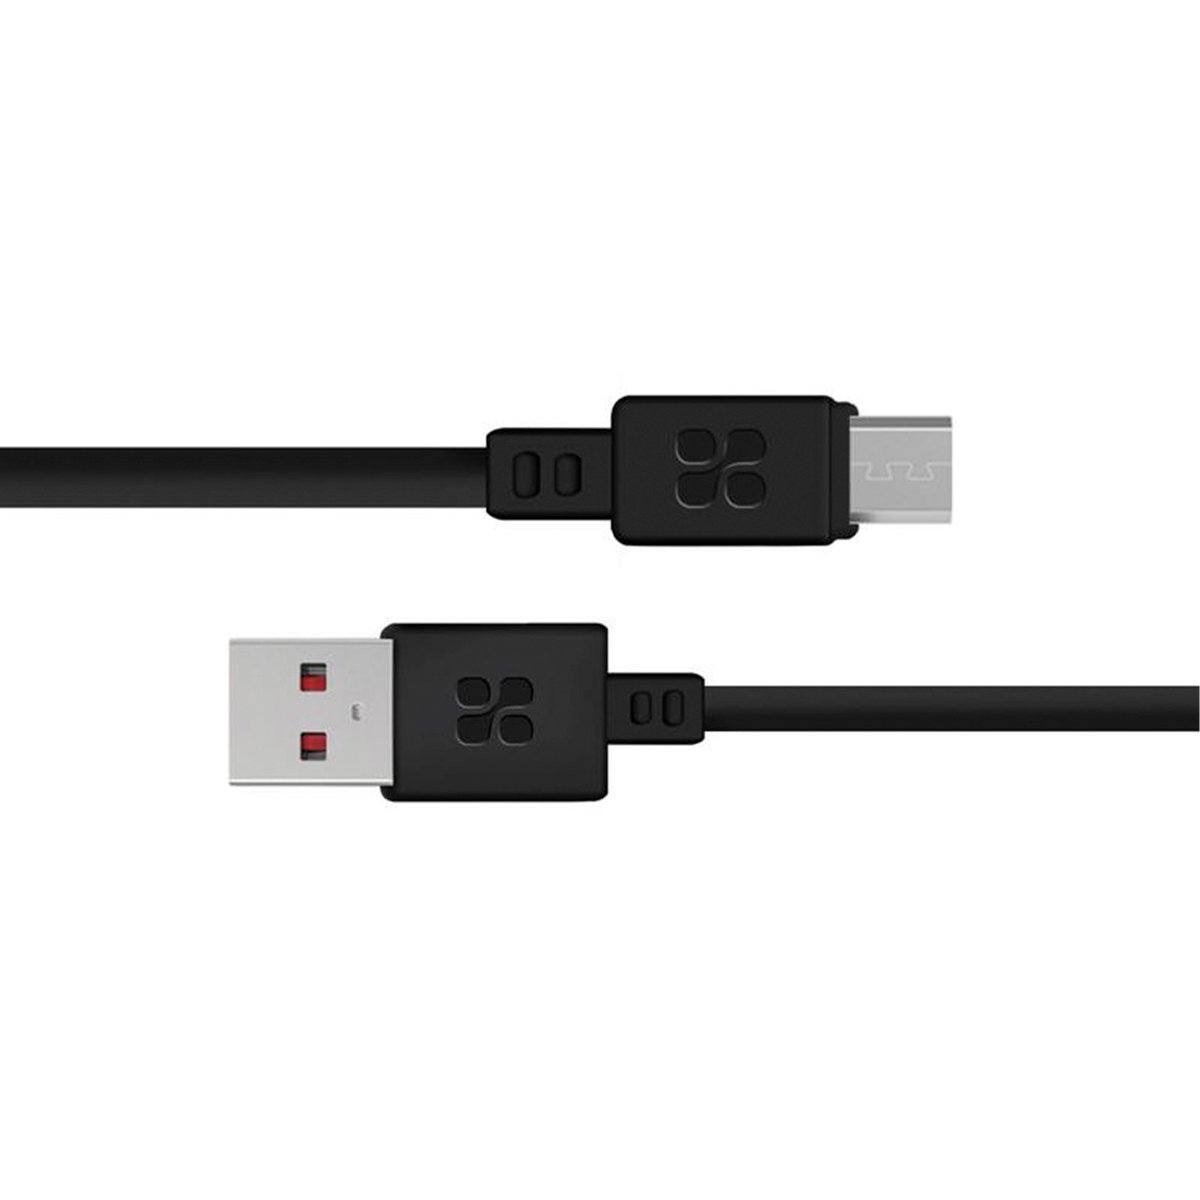 PROMATE Data Transfer and Charge Micro-USB Cable with 1.8A Charging,Support,1.2m Length Assorted Colors(Available color will be shipped)(MICROCORD-1)